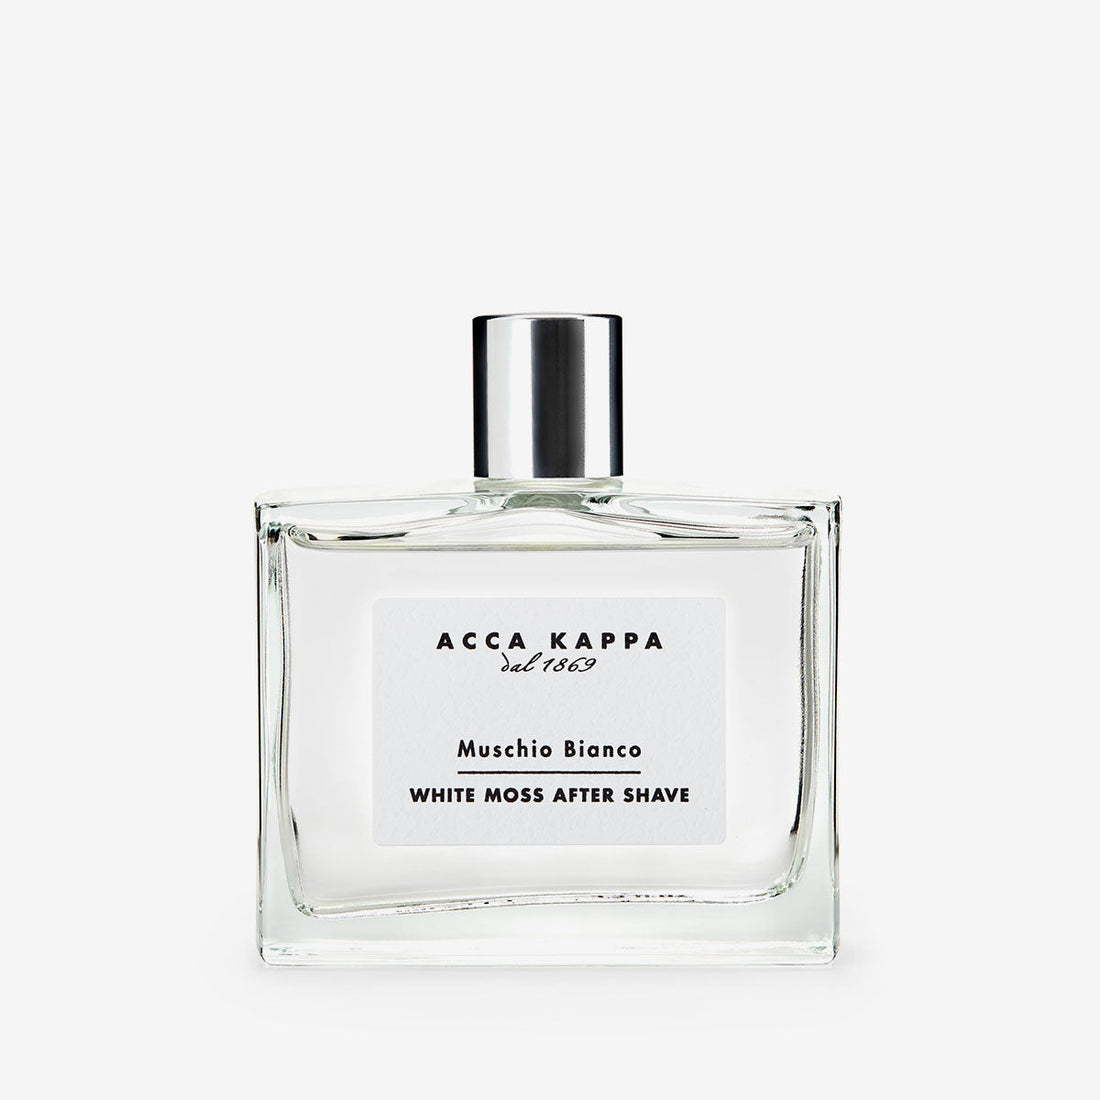 ACCA KAPPA White Moss After Shave